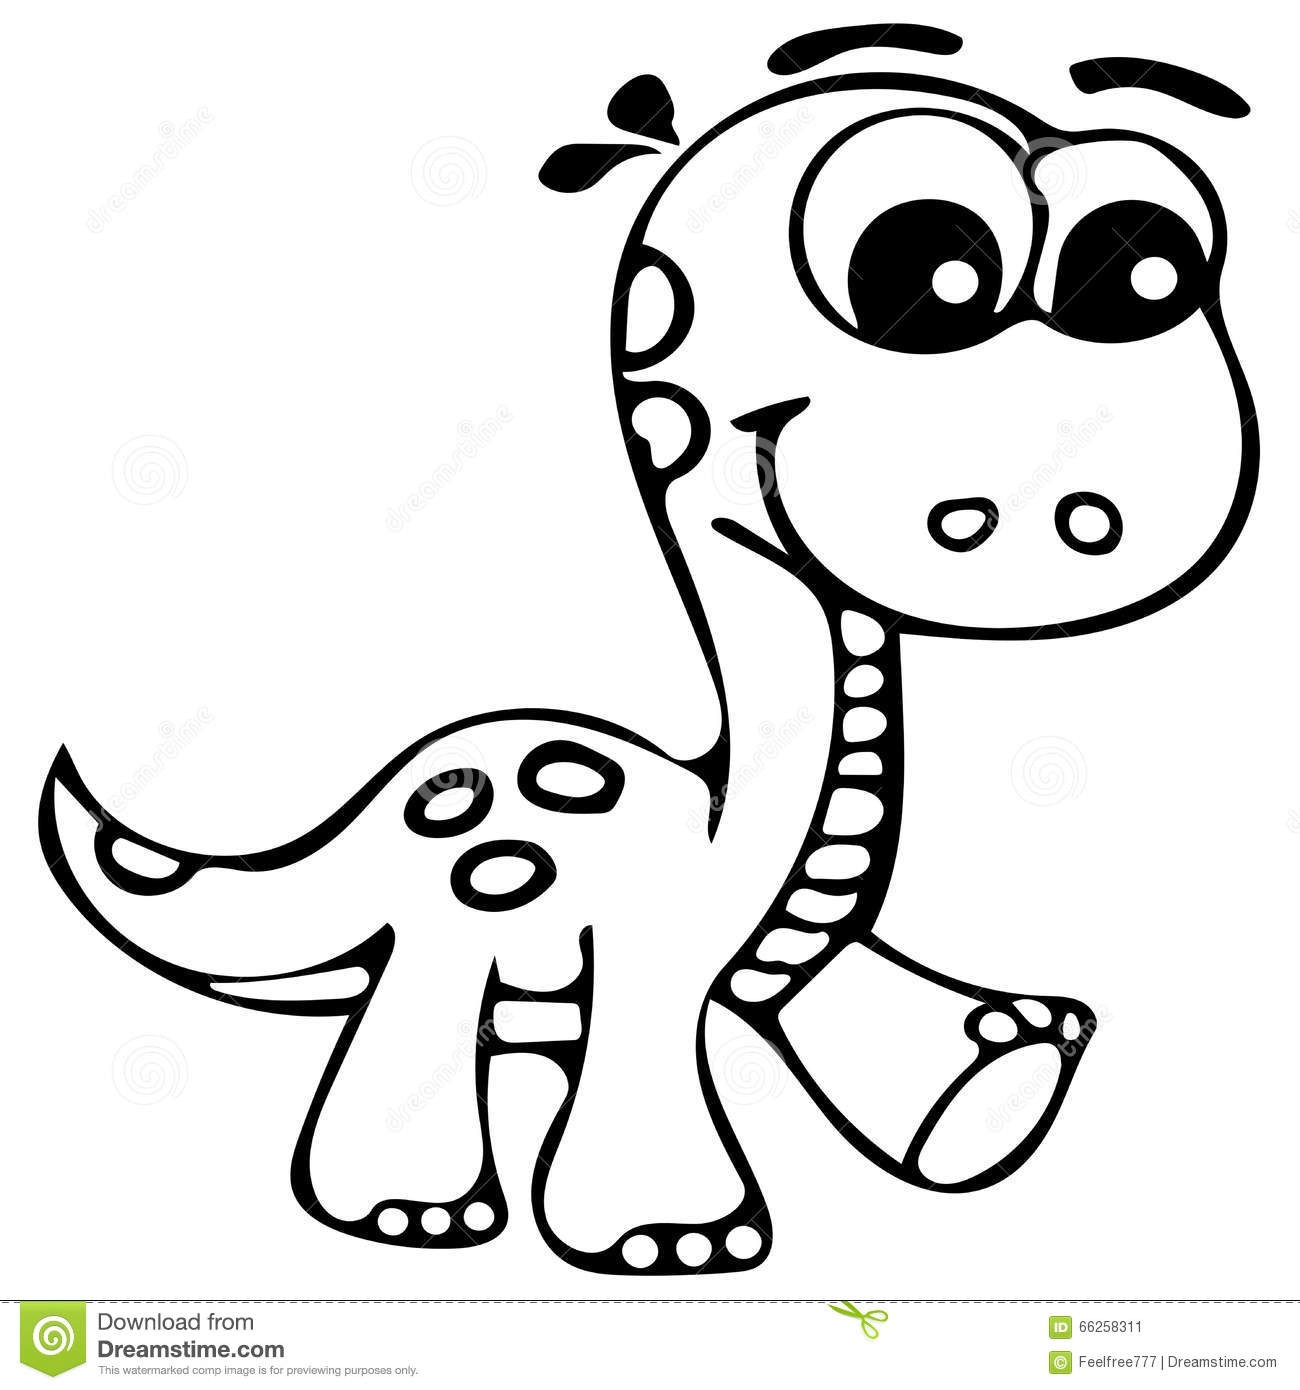 Cute Coloring Pages Printable
 Cute Coloring Pages Baby Dinosaurs Gallery